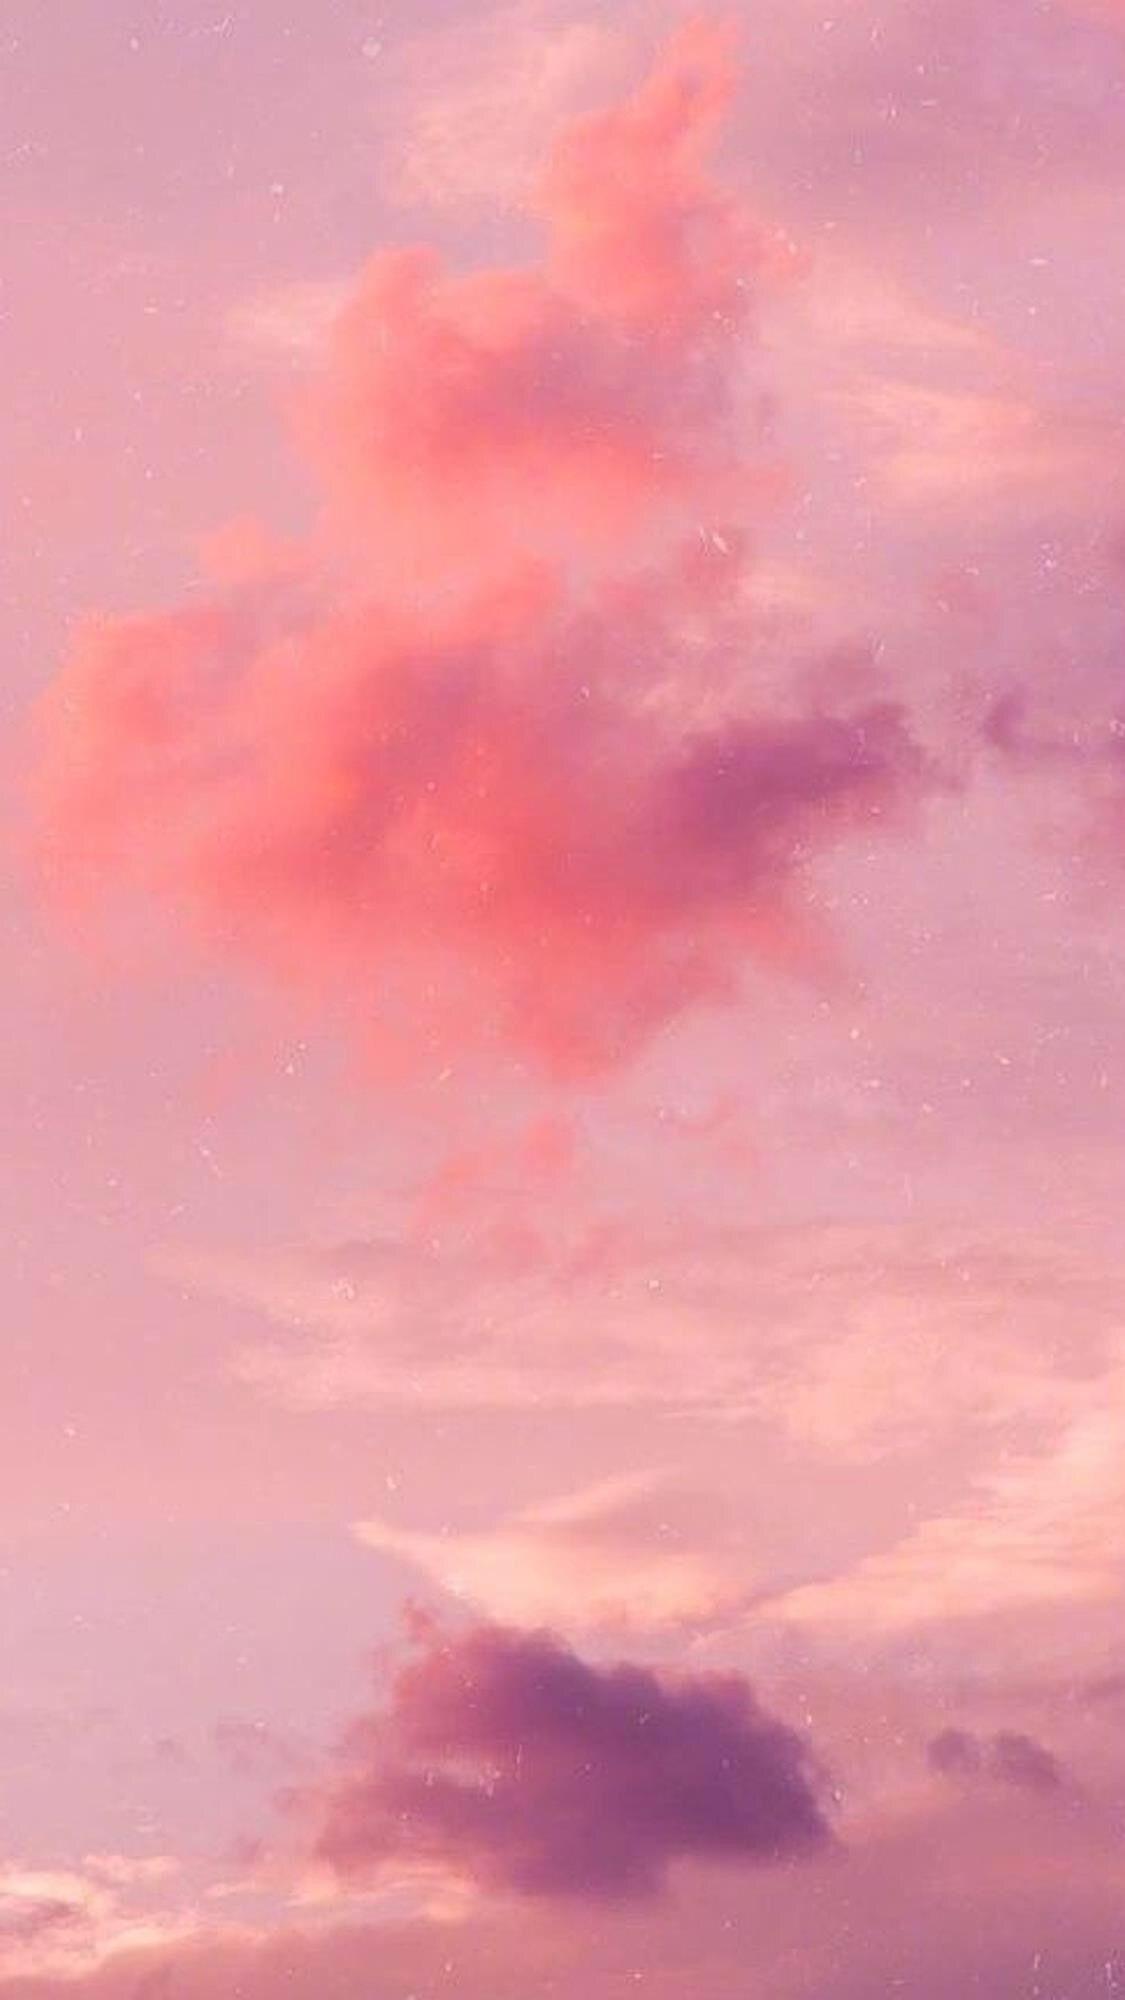 15 Excellent pink aesthetic wallpaper sky You Can Use It Free Of Charge ...